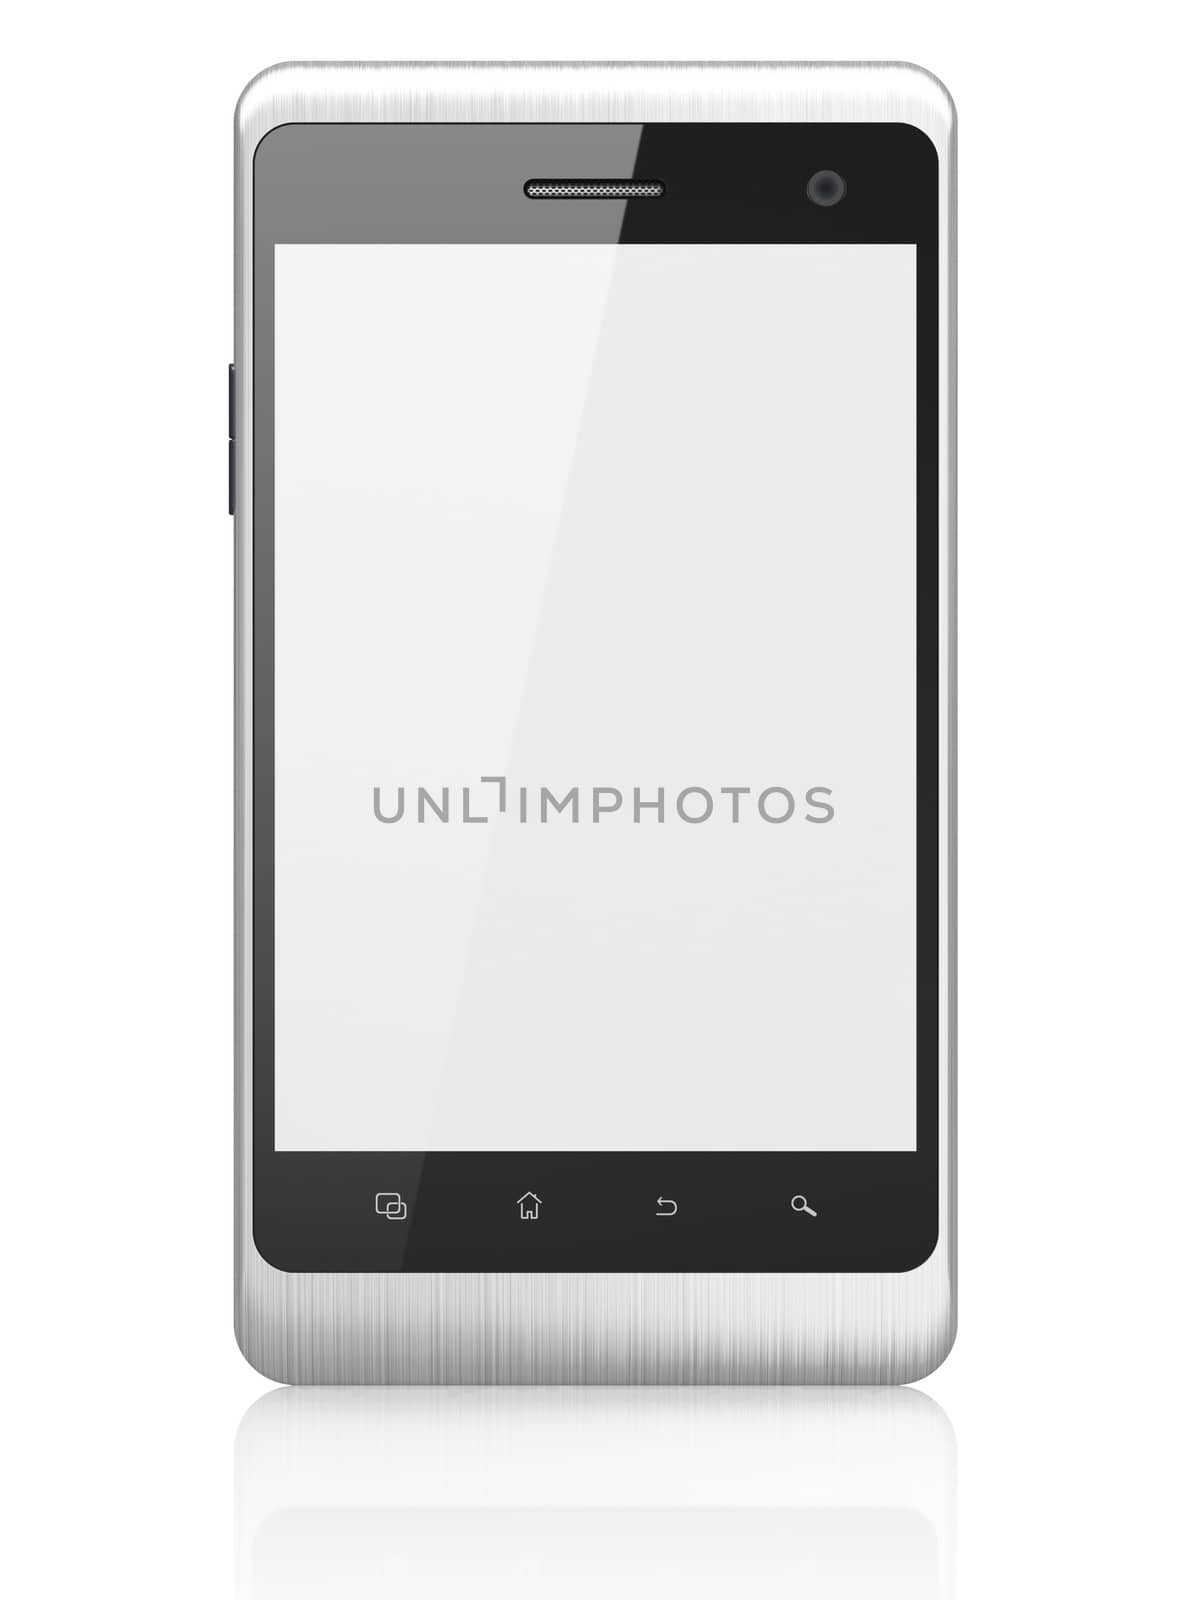 Beautiful smartphone on white background. Generic mobile smart phone, 3d render